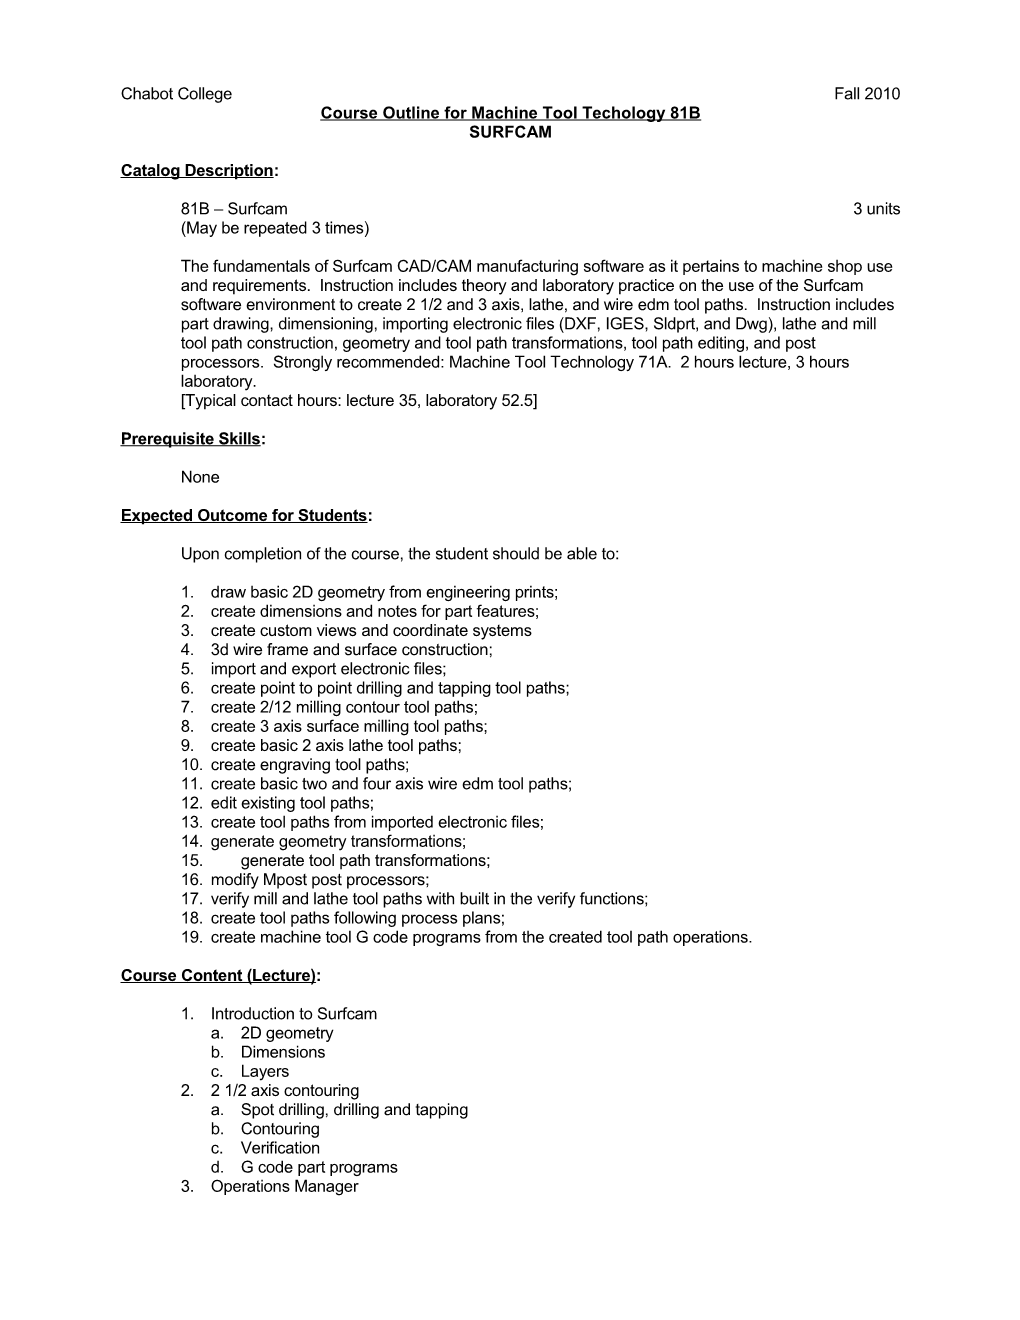 Course Outline for Machine Tool Technology 81B - Page 1